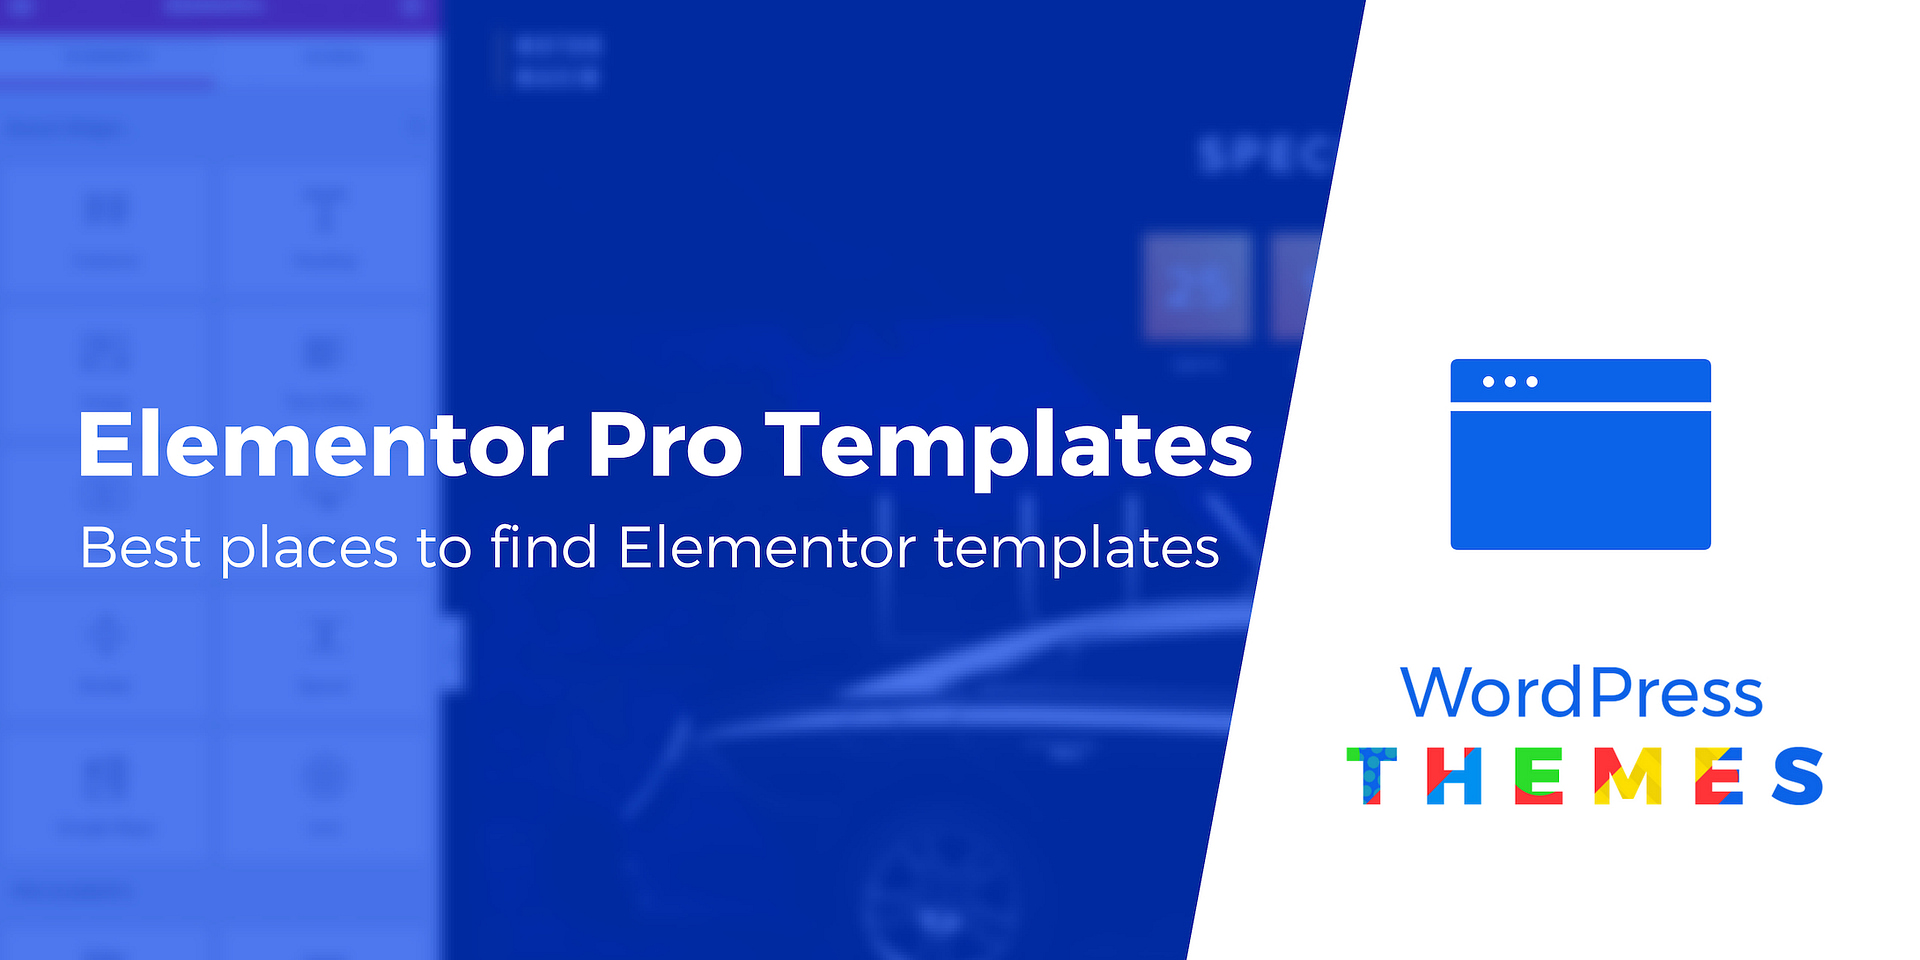 elementor pro templates free download